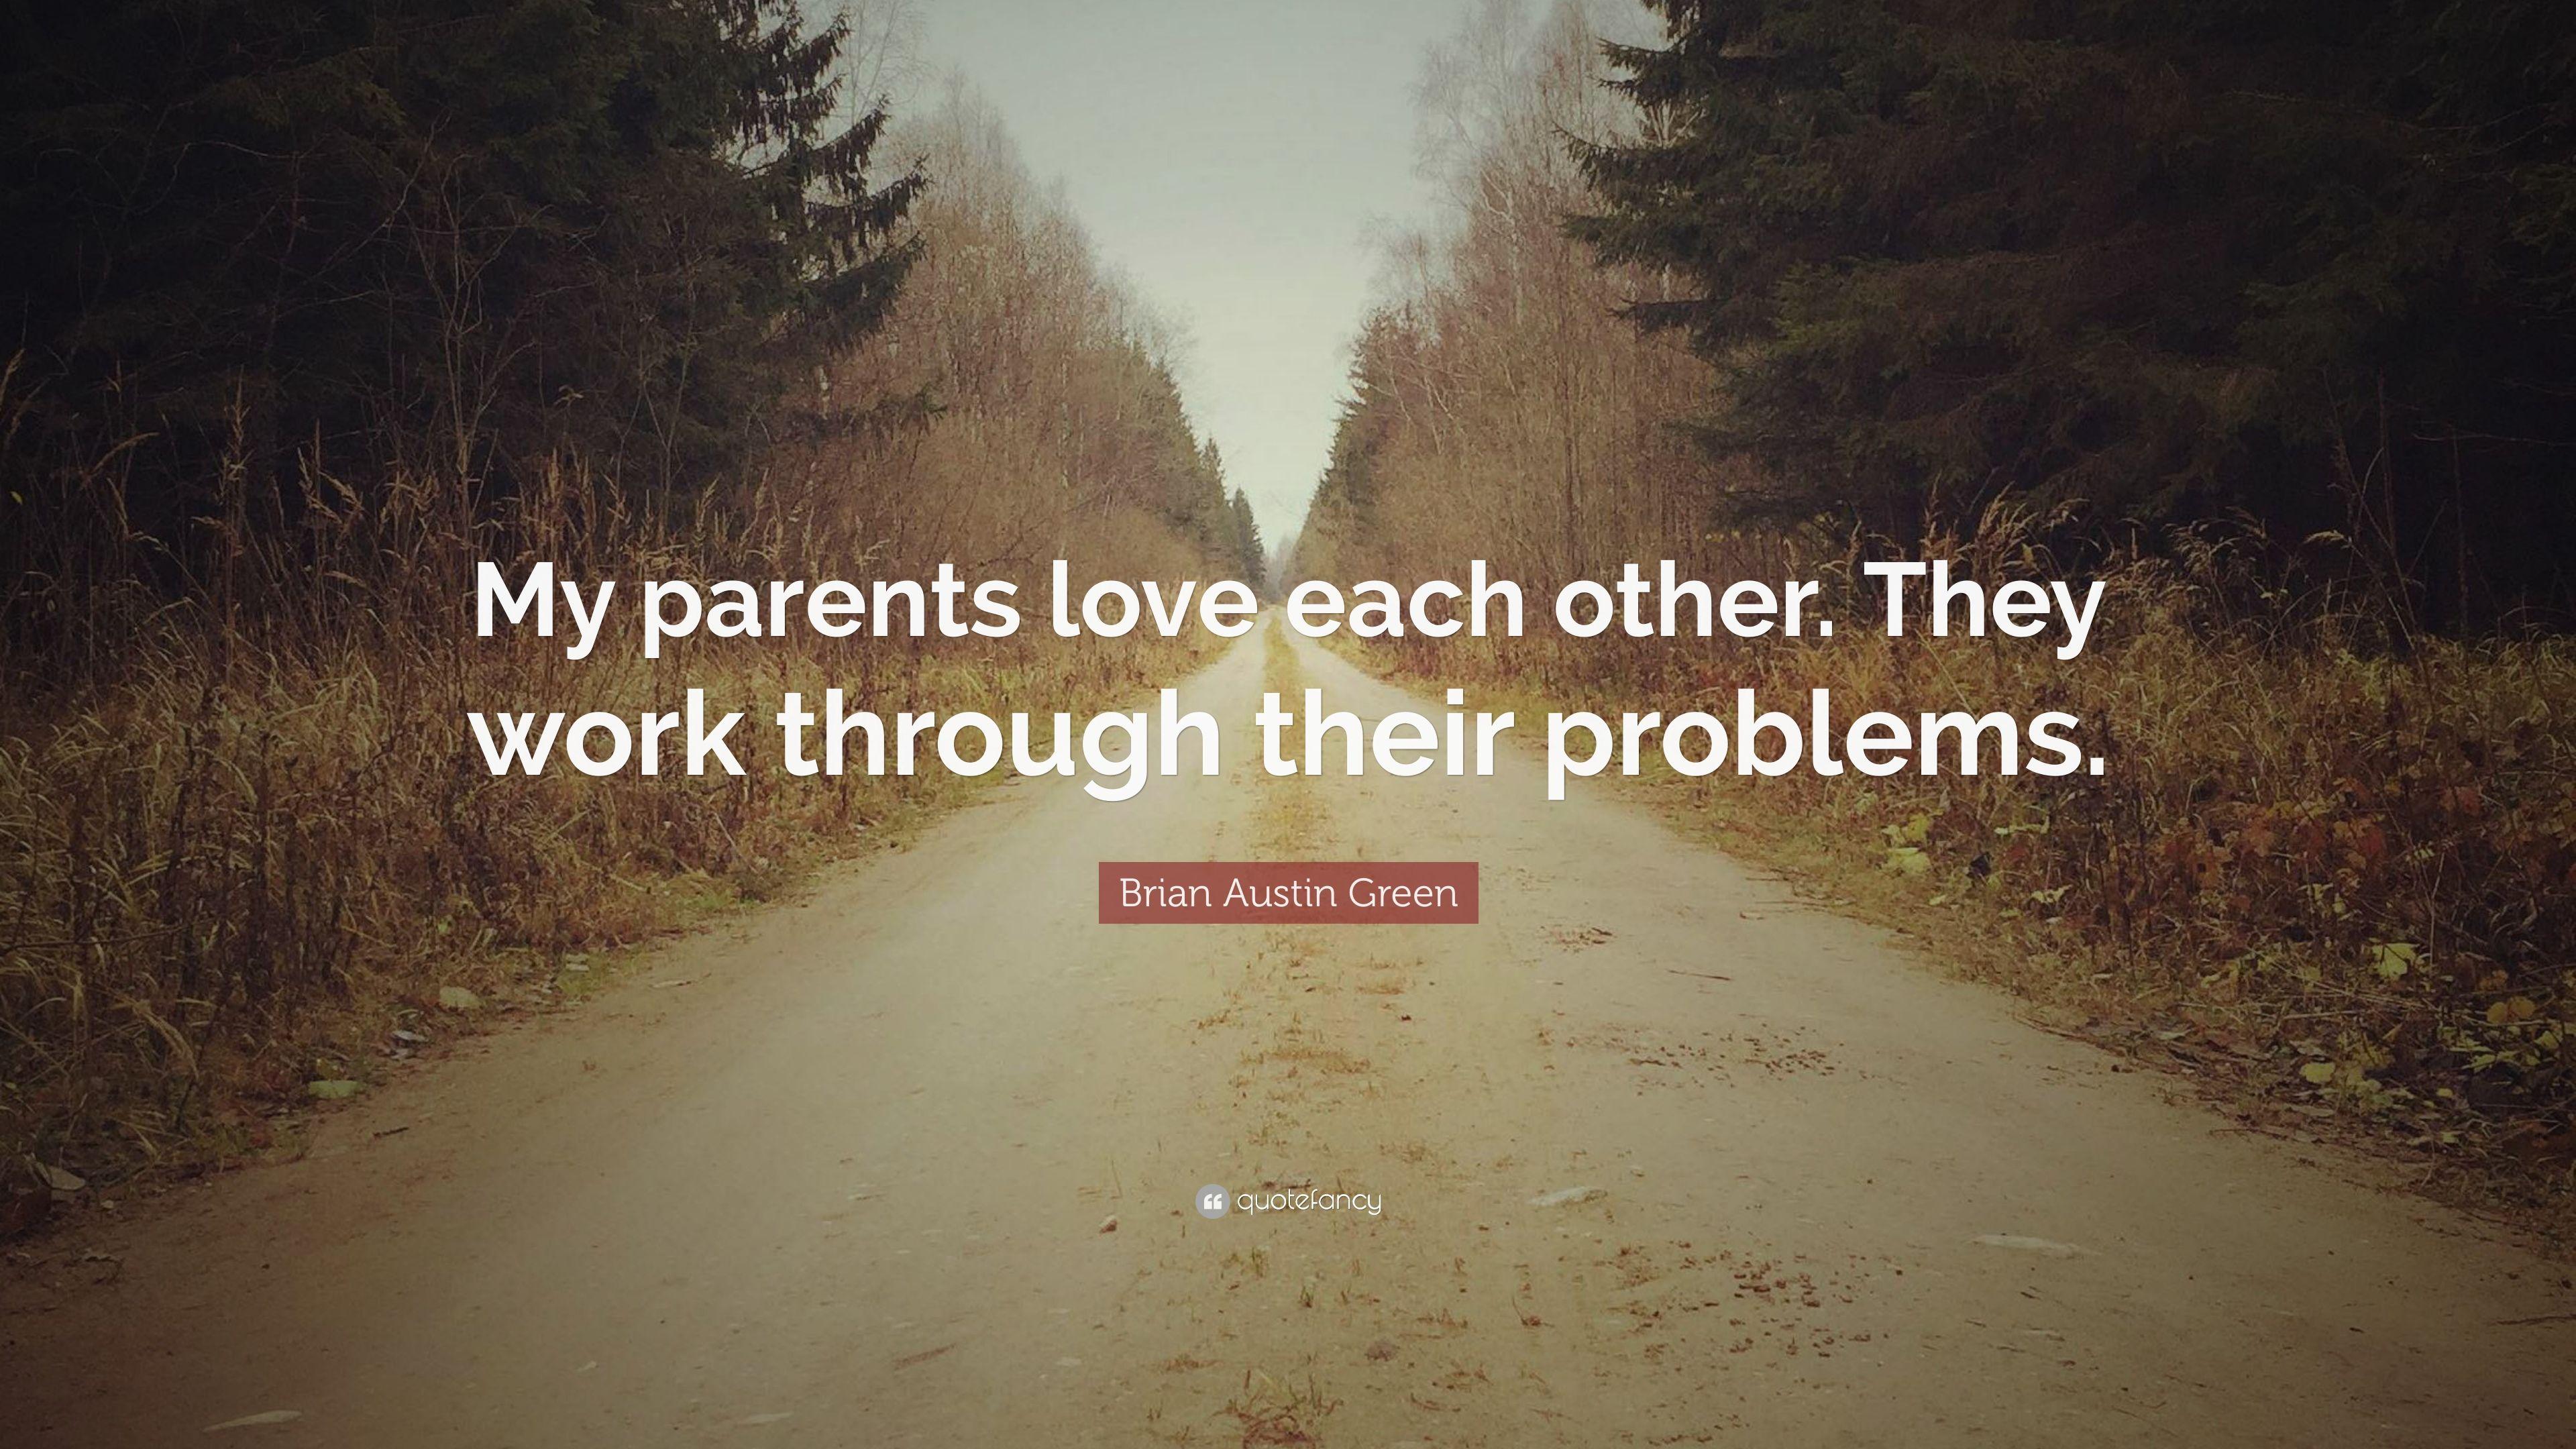 Brian Austin Green Quote: “My parents love each other. They work